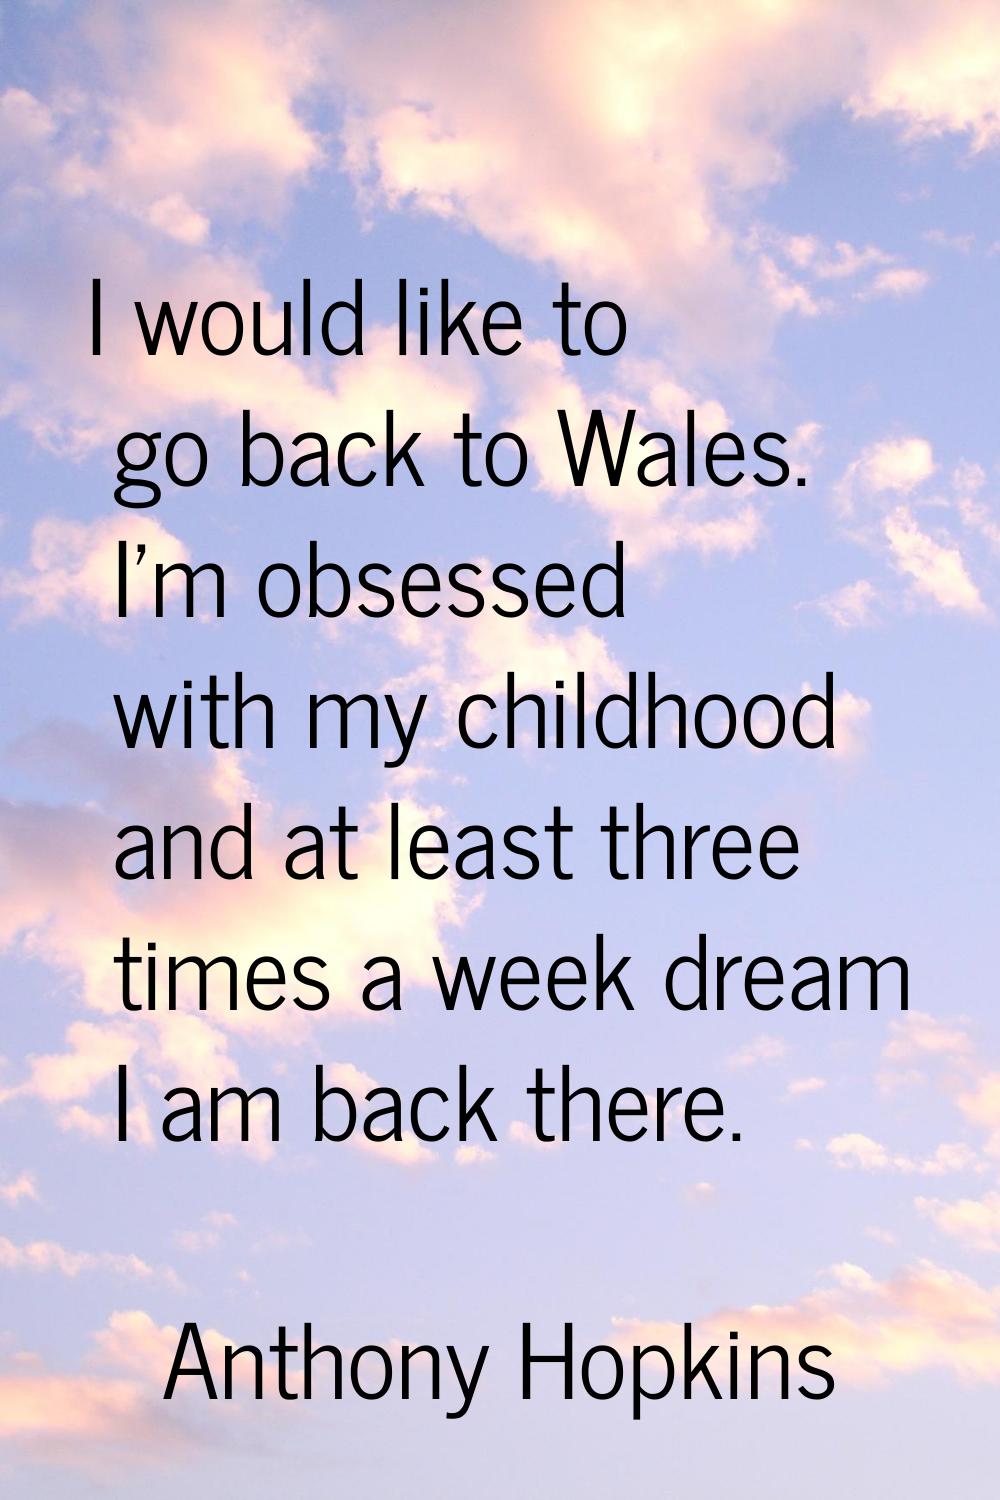 I would like to go back to Wales. I'm obsessed with my childhood and at least three times a week dr